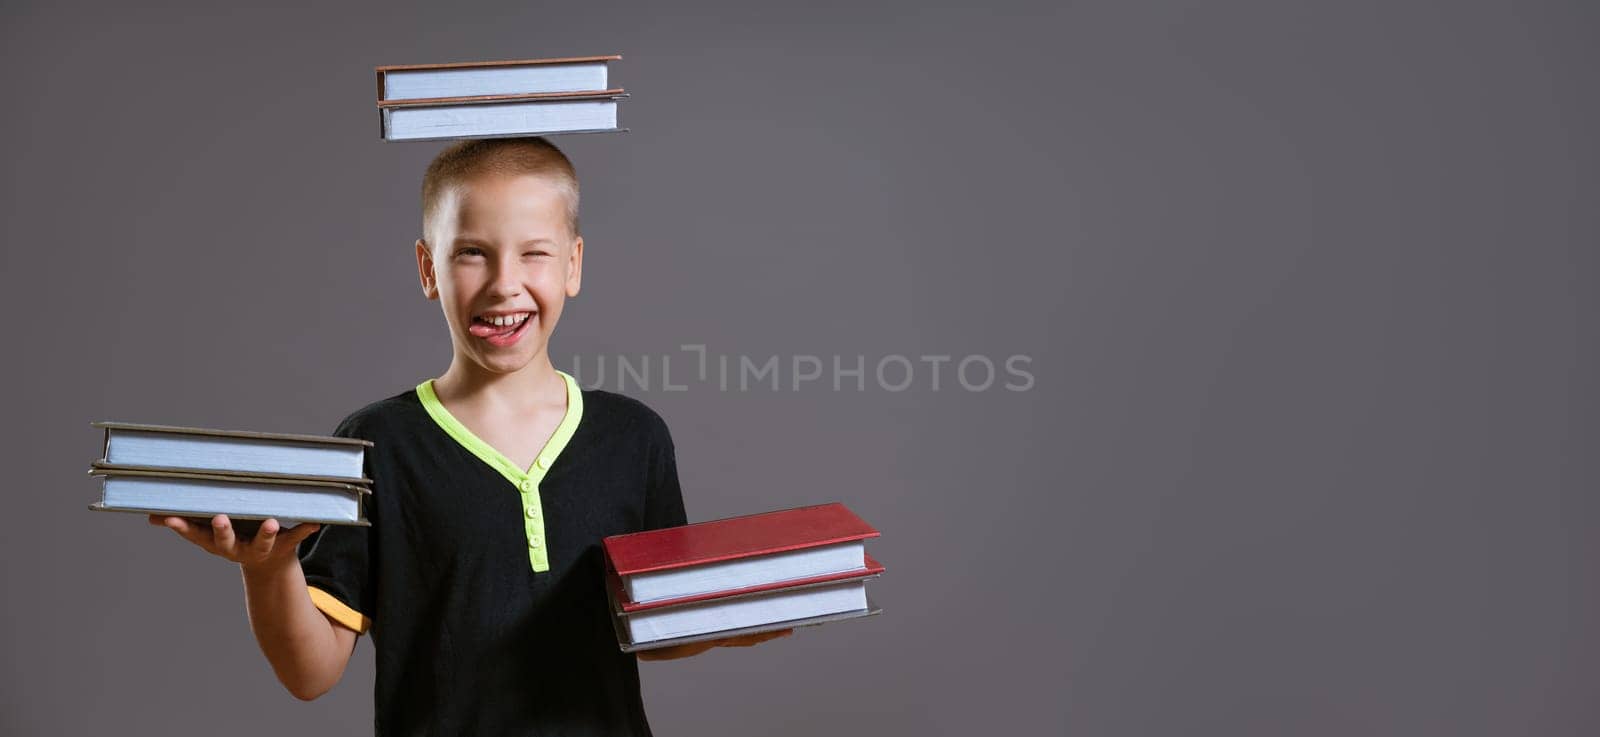 funny boy holding a book in his hands and on his head by EkaterinaPereslavtseva